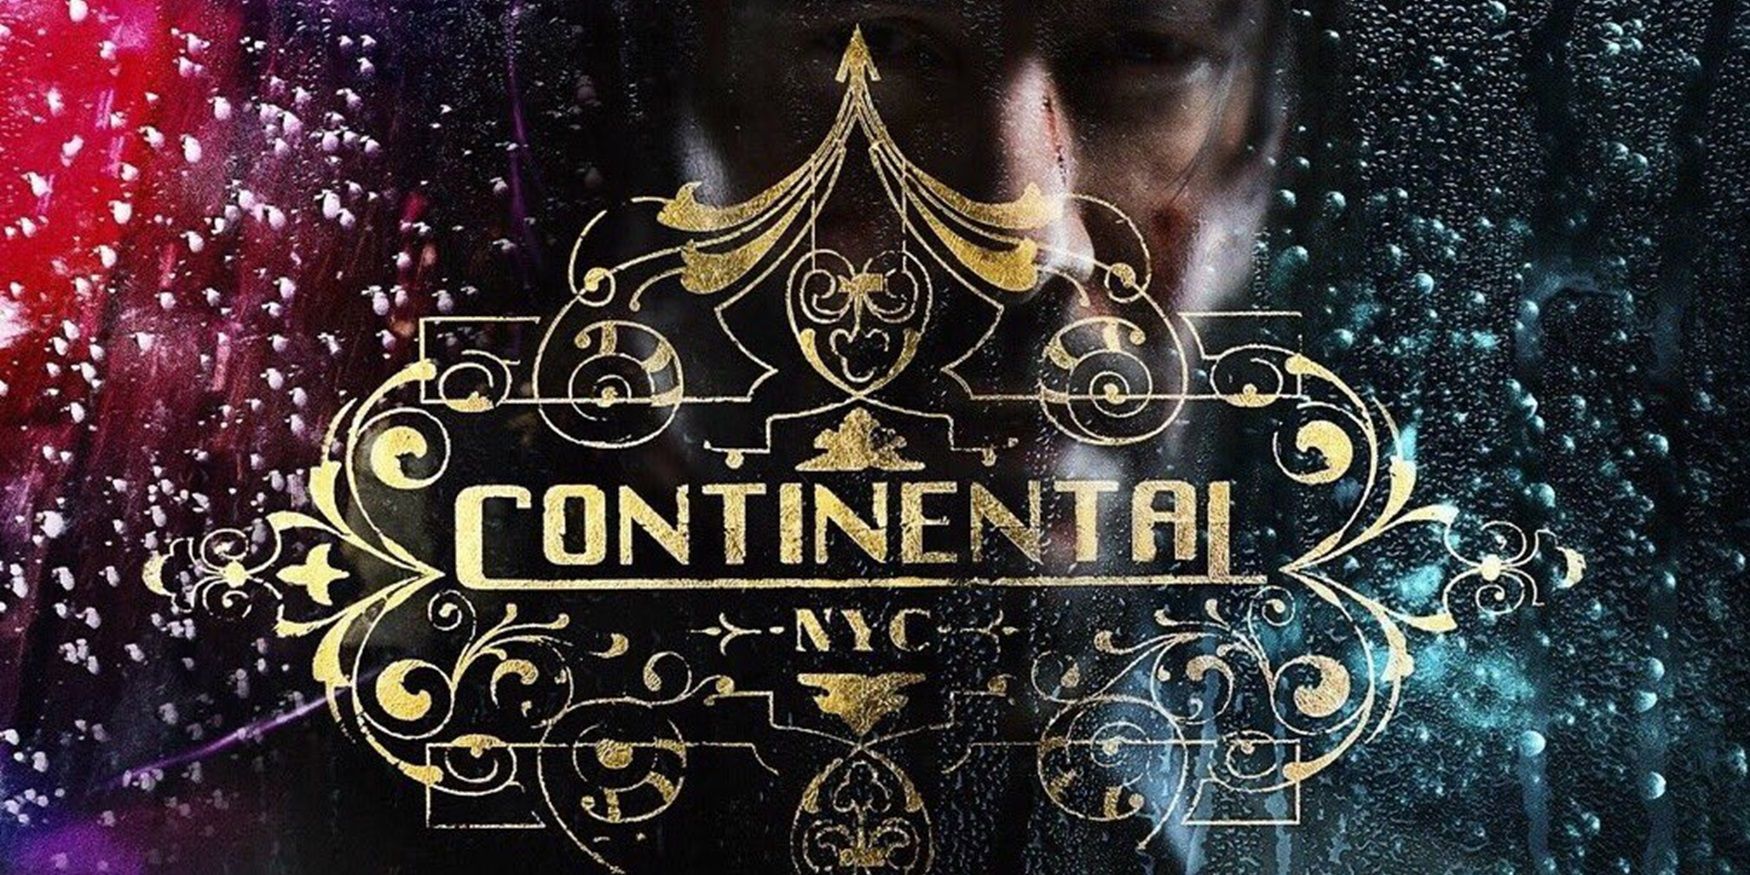 John Wick in the window of the Continental